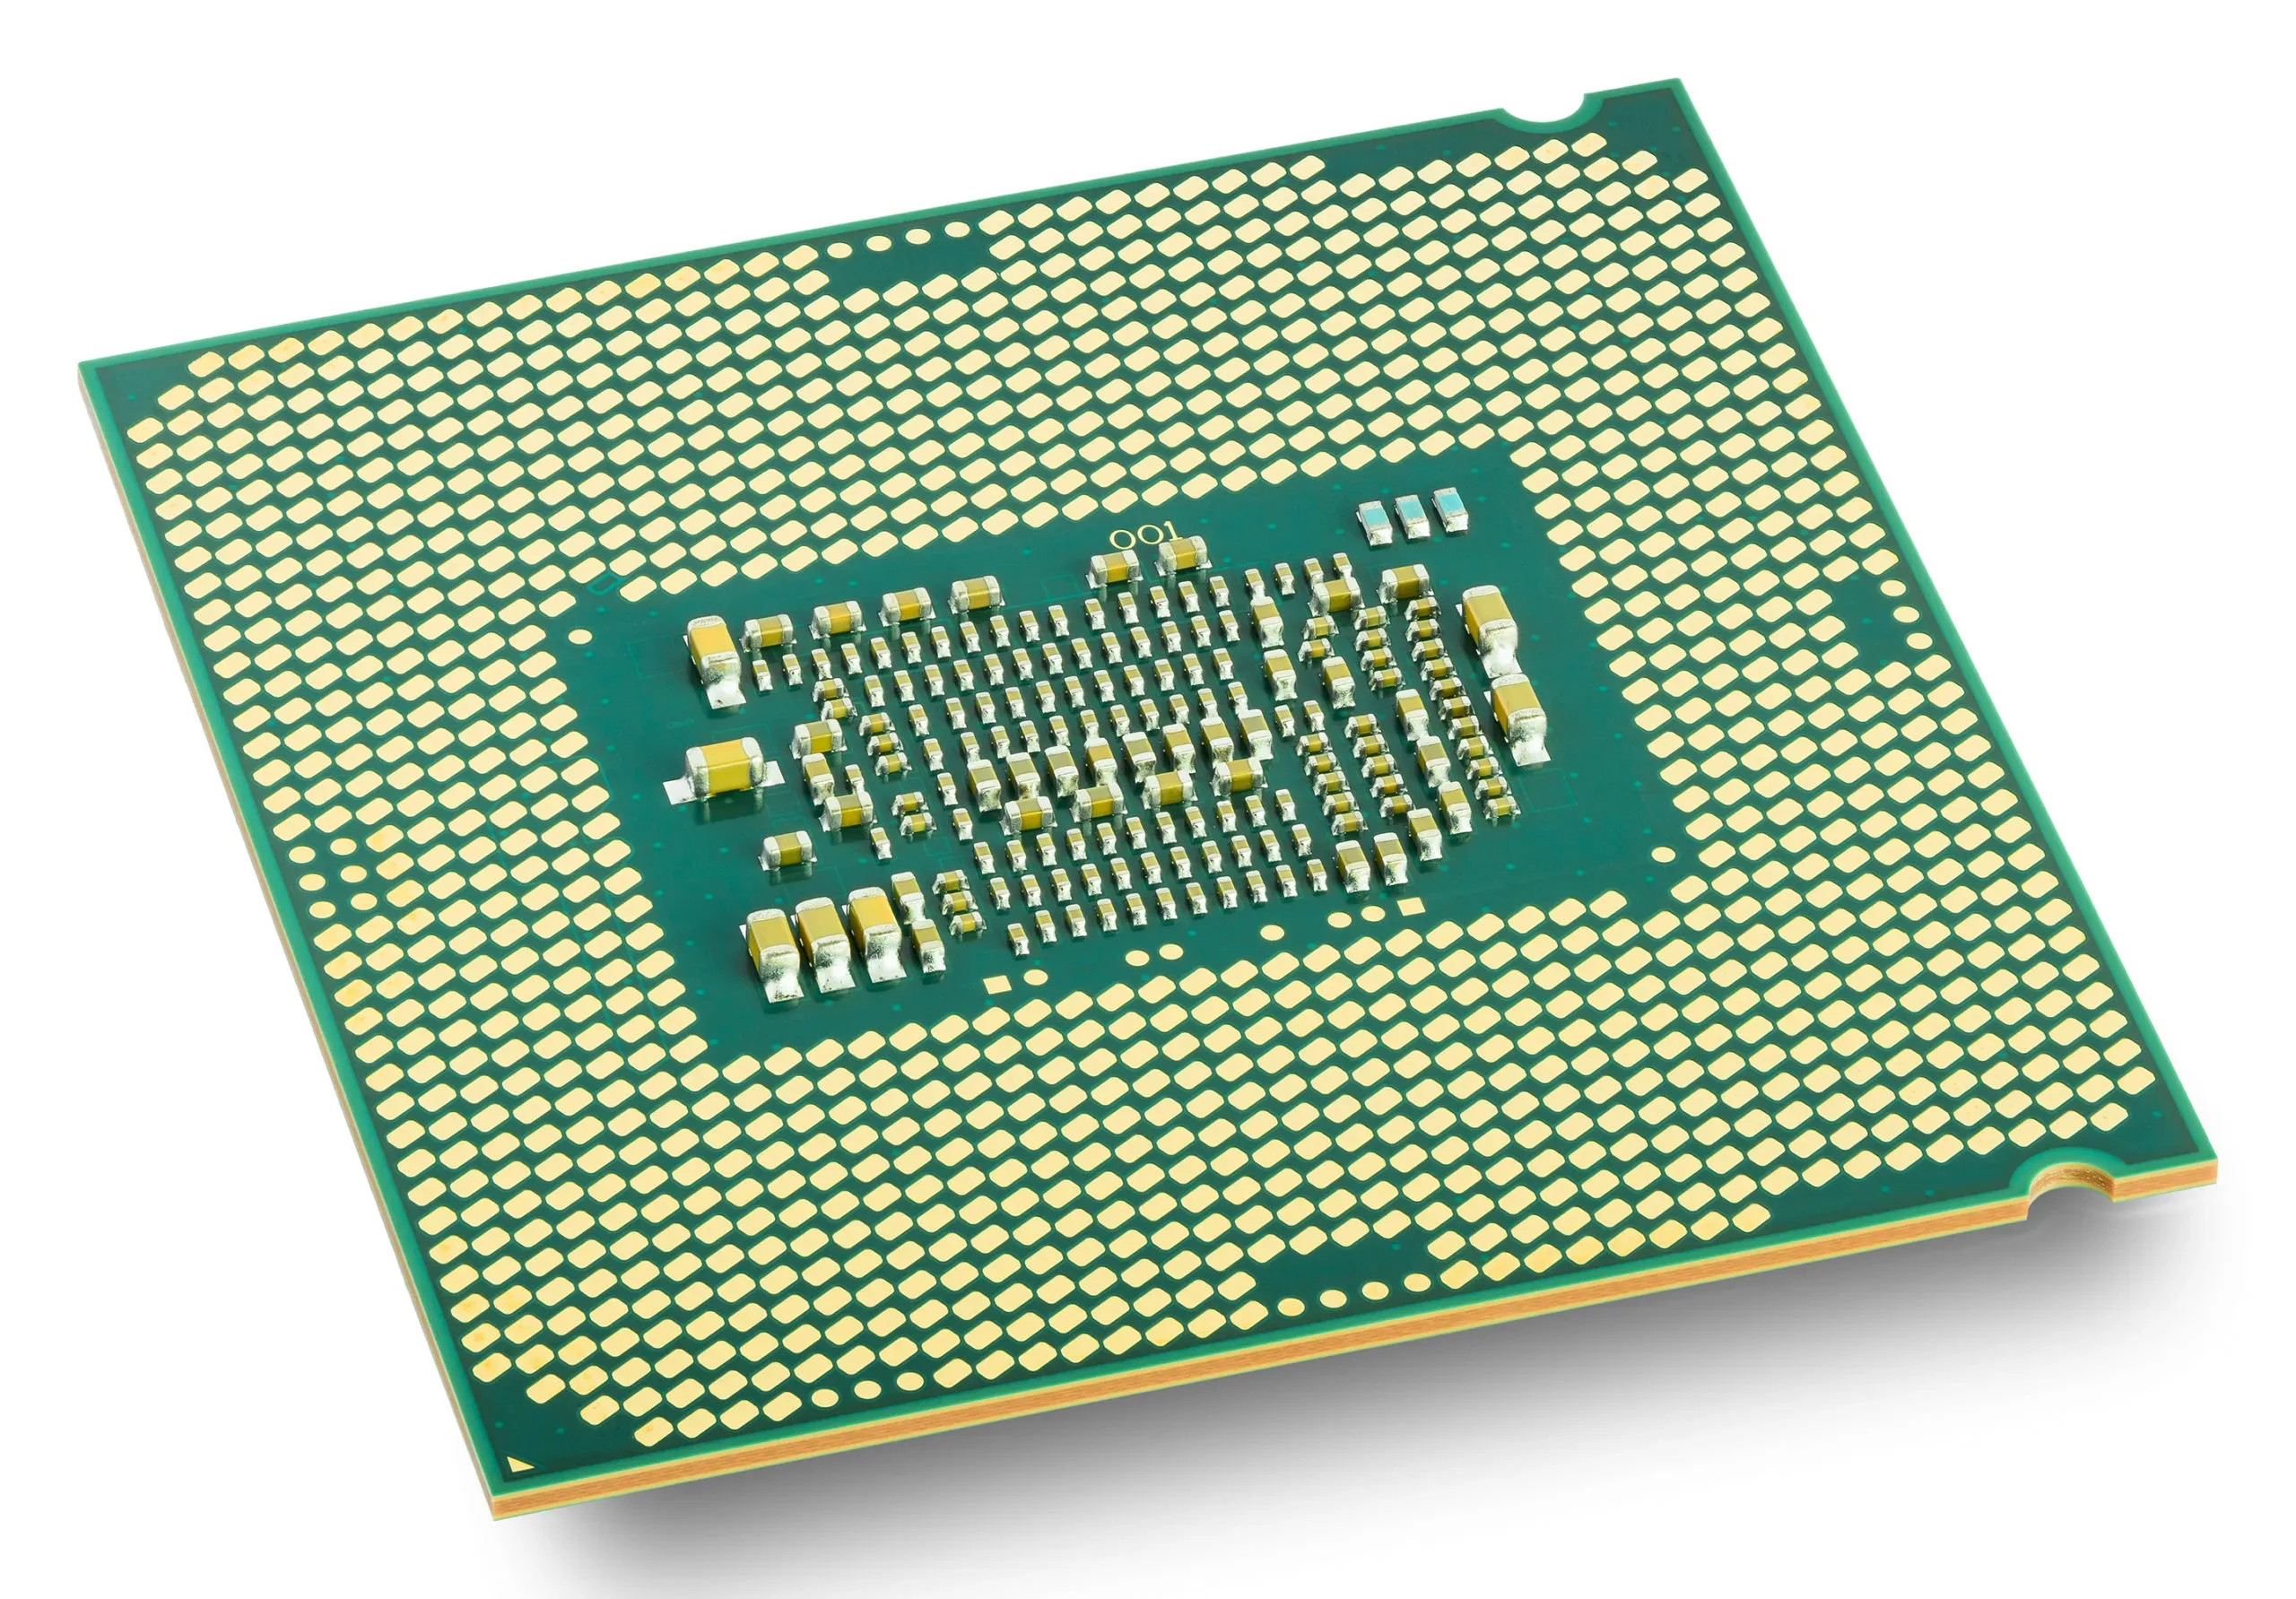 Intel Getting Behind Neuromorphic Computing With Lohi 2